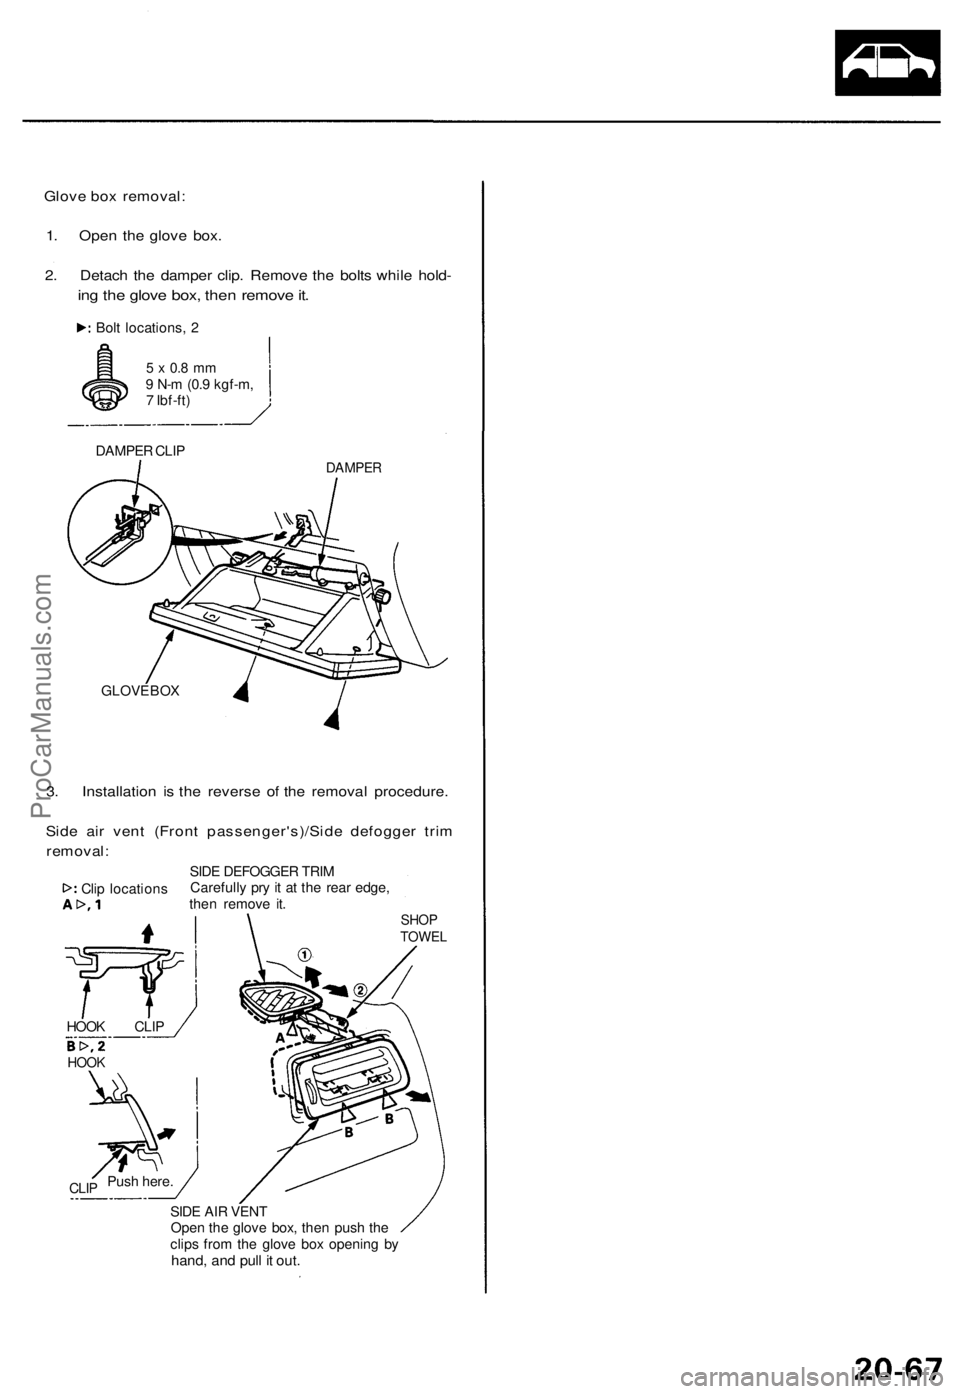 ACURA TL 1995  Service Repair Manual 
Glove box removal:

1. Open the glove box.

2. Detach the damper clip. Remove the bolts while hold-

ing the glove box, then remove it.

5 x 0.8 mm

9 N-m (0.9 kgf-m,

7 Ibf-ft)

DAMPER CLIP

DAMPER
